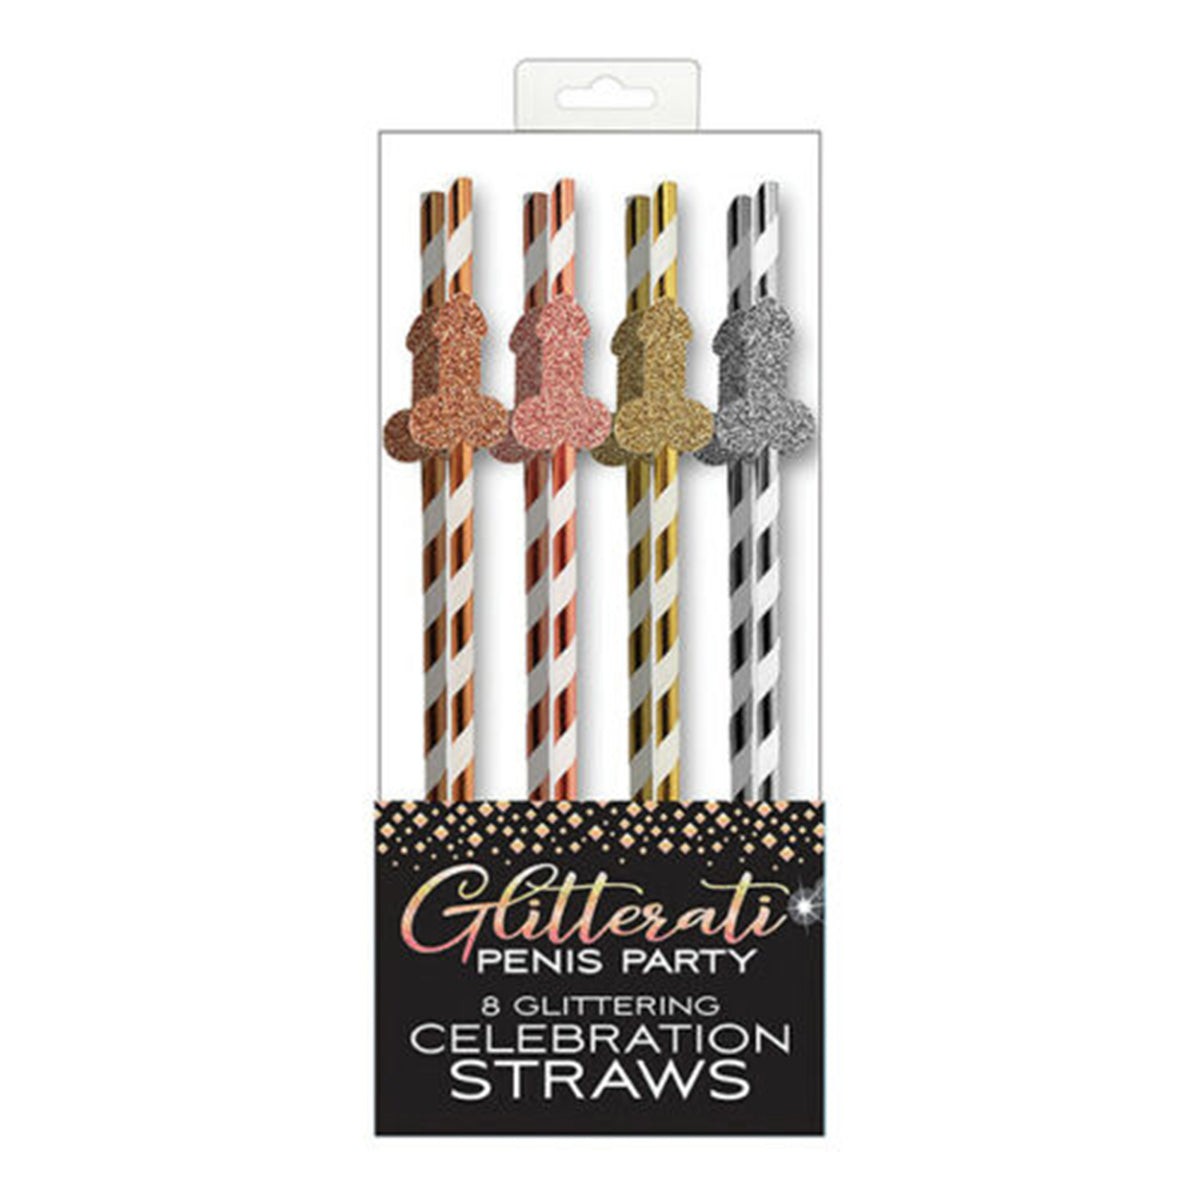 Glitterati Long Cocktail Party Straws, 8 Count